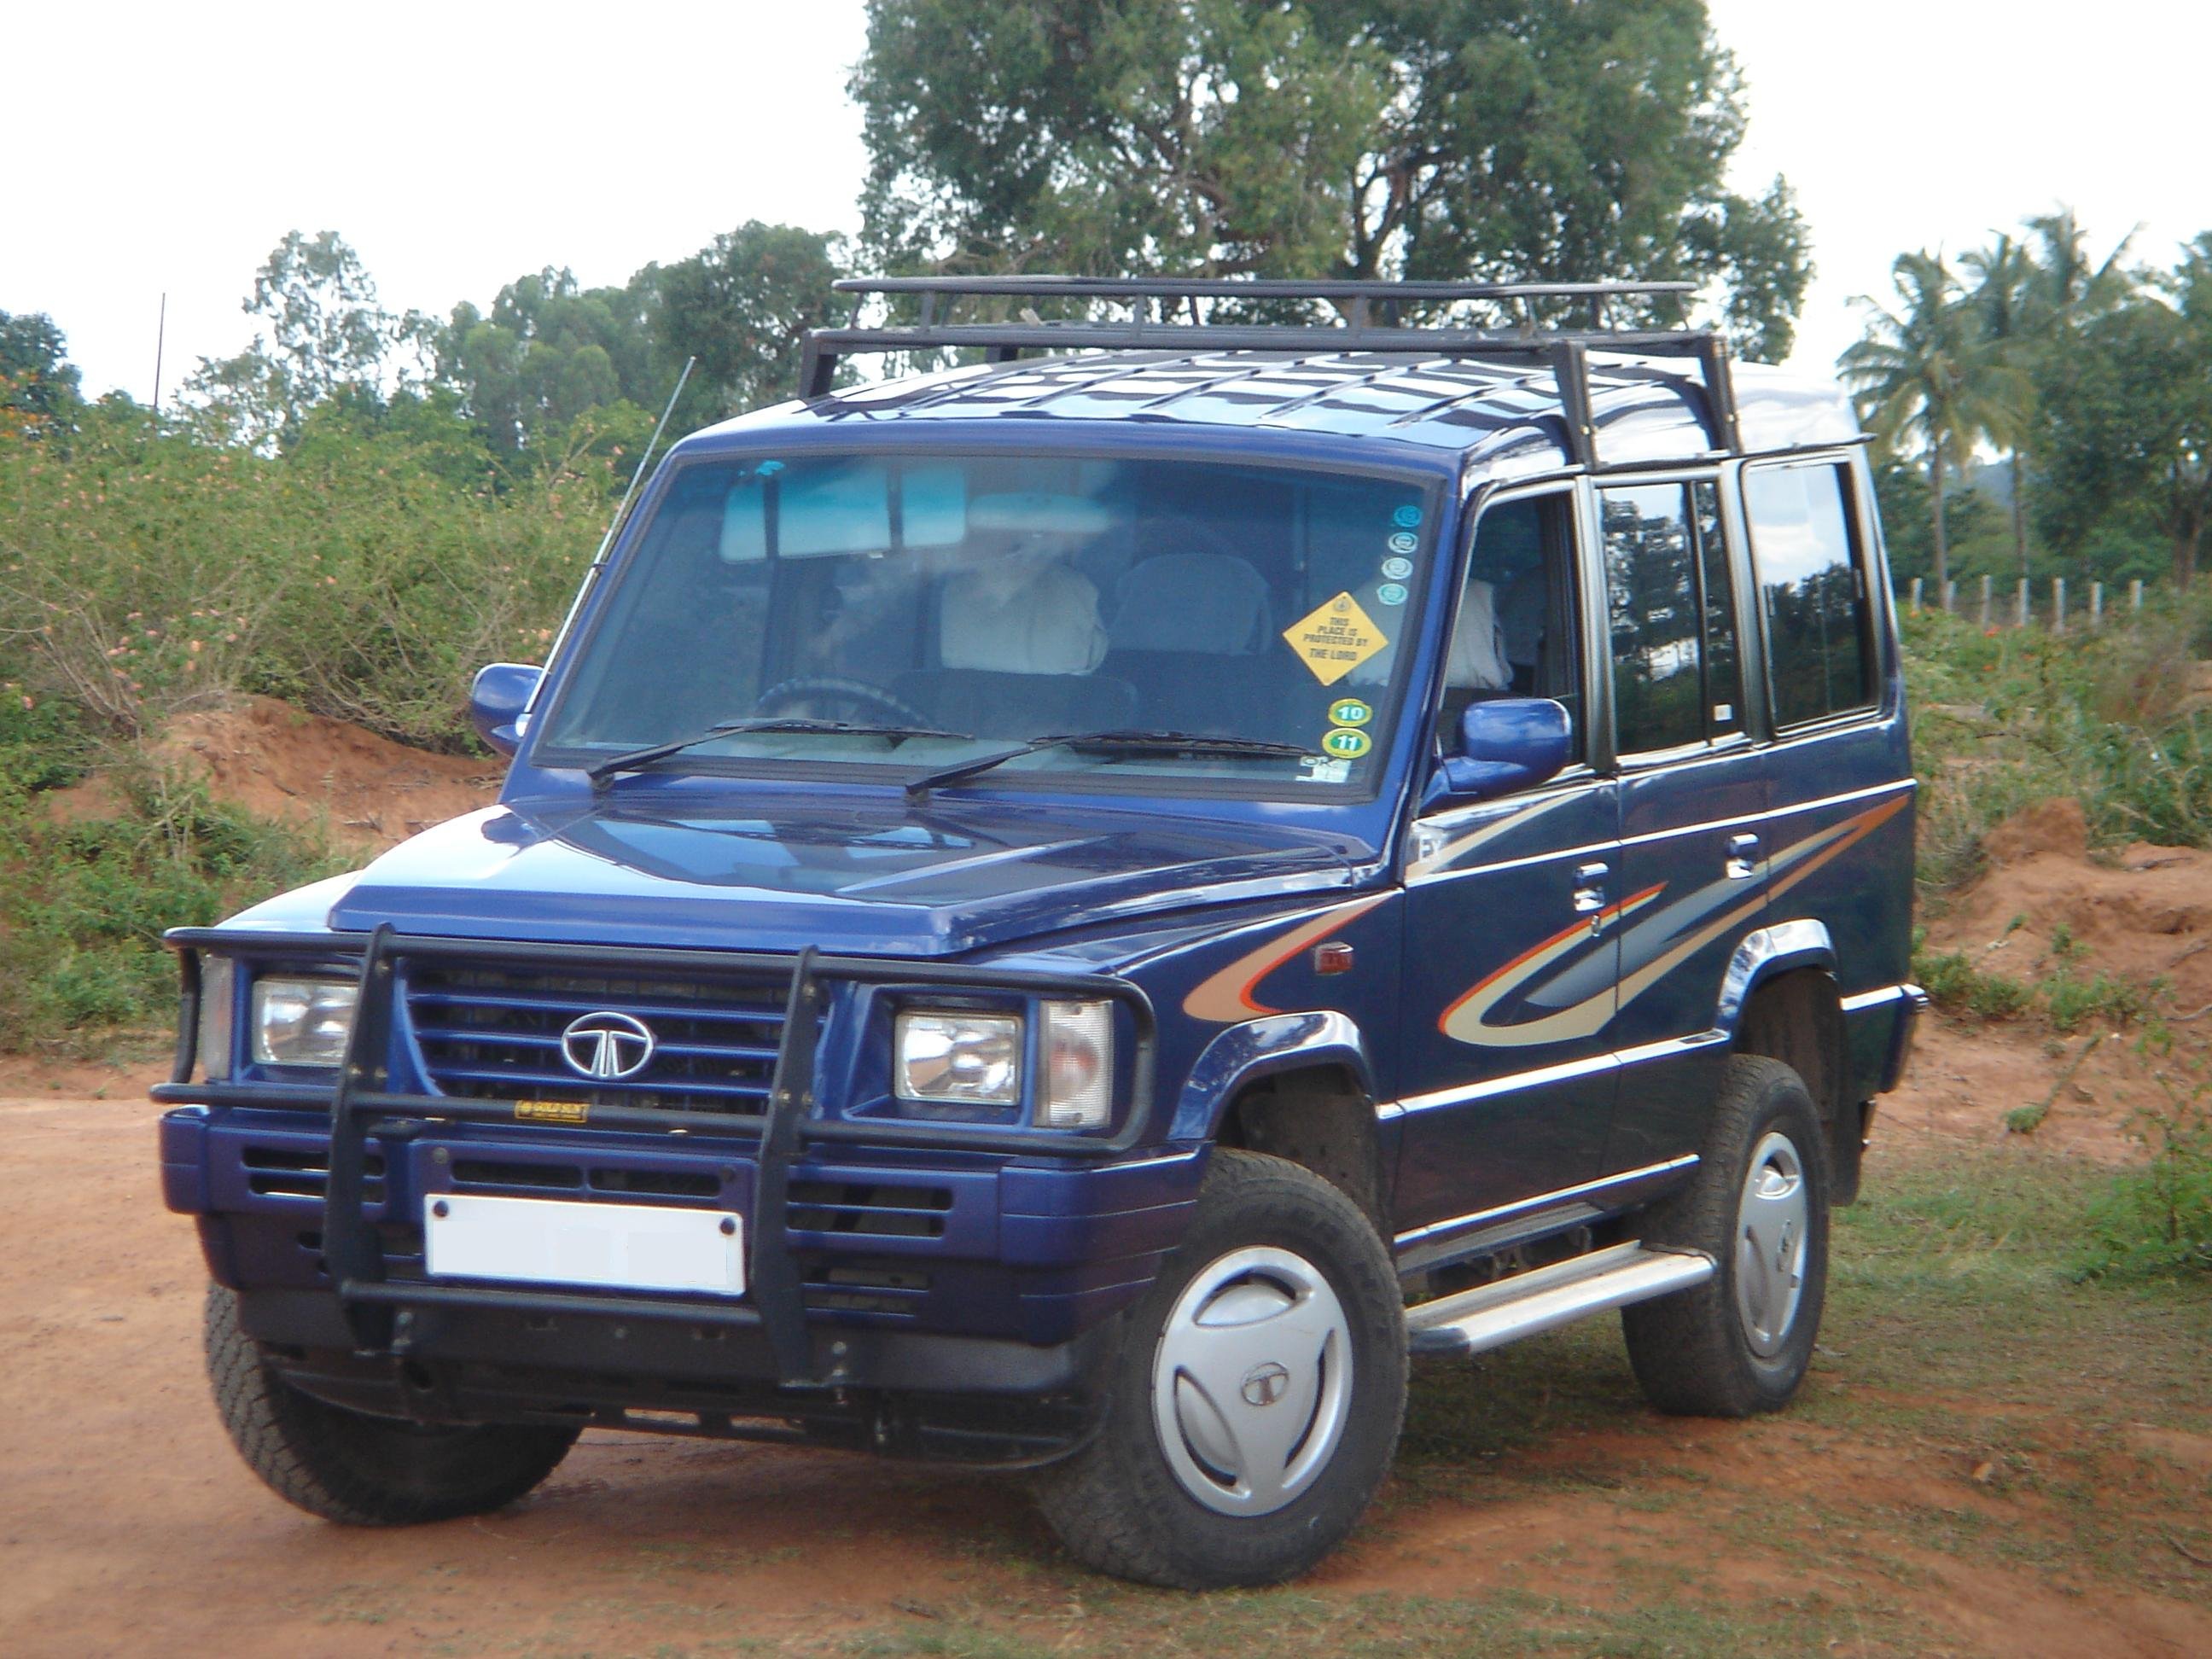 TATA SUMO EX+ (fully loaded) For Sale - Team-BHP